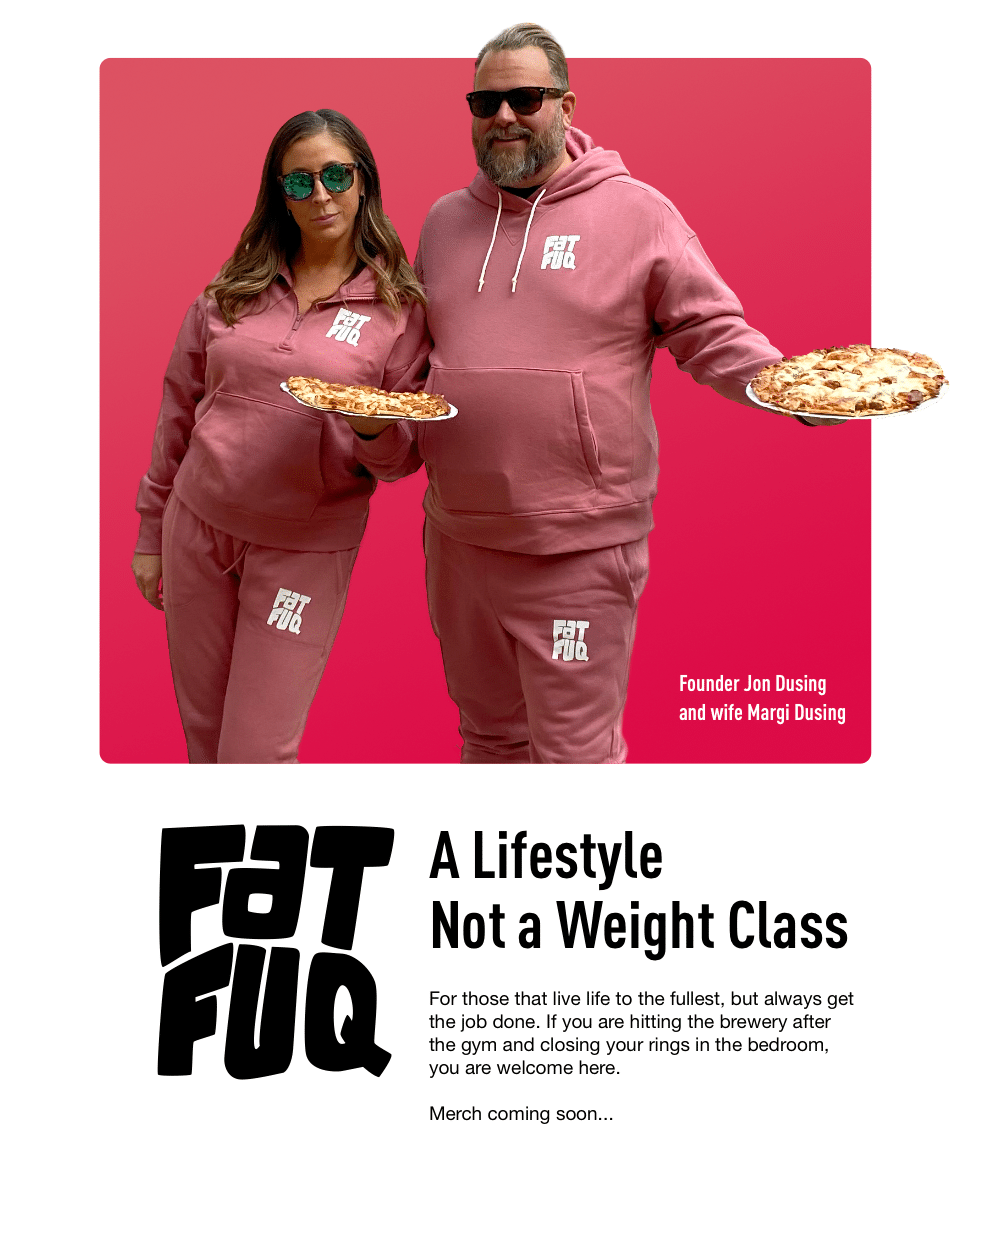 FAT FUQ - A Lifestyle, Not a Weight Class. For those that live life to the fullest, but always get the job done. If you are hitting the brewery after the gym and closing your rings in the bedroom, you are welcome here. Merch coming soon...